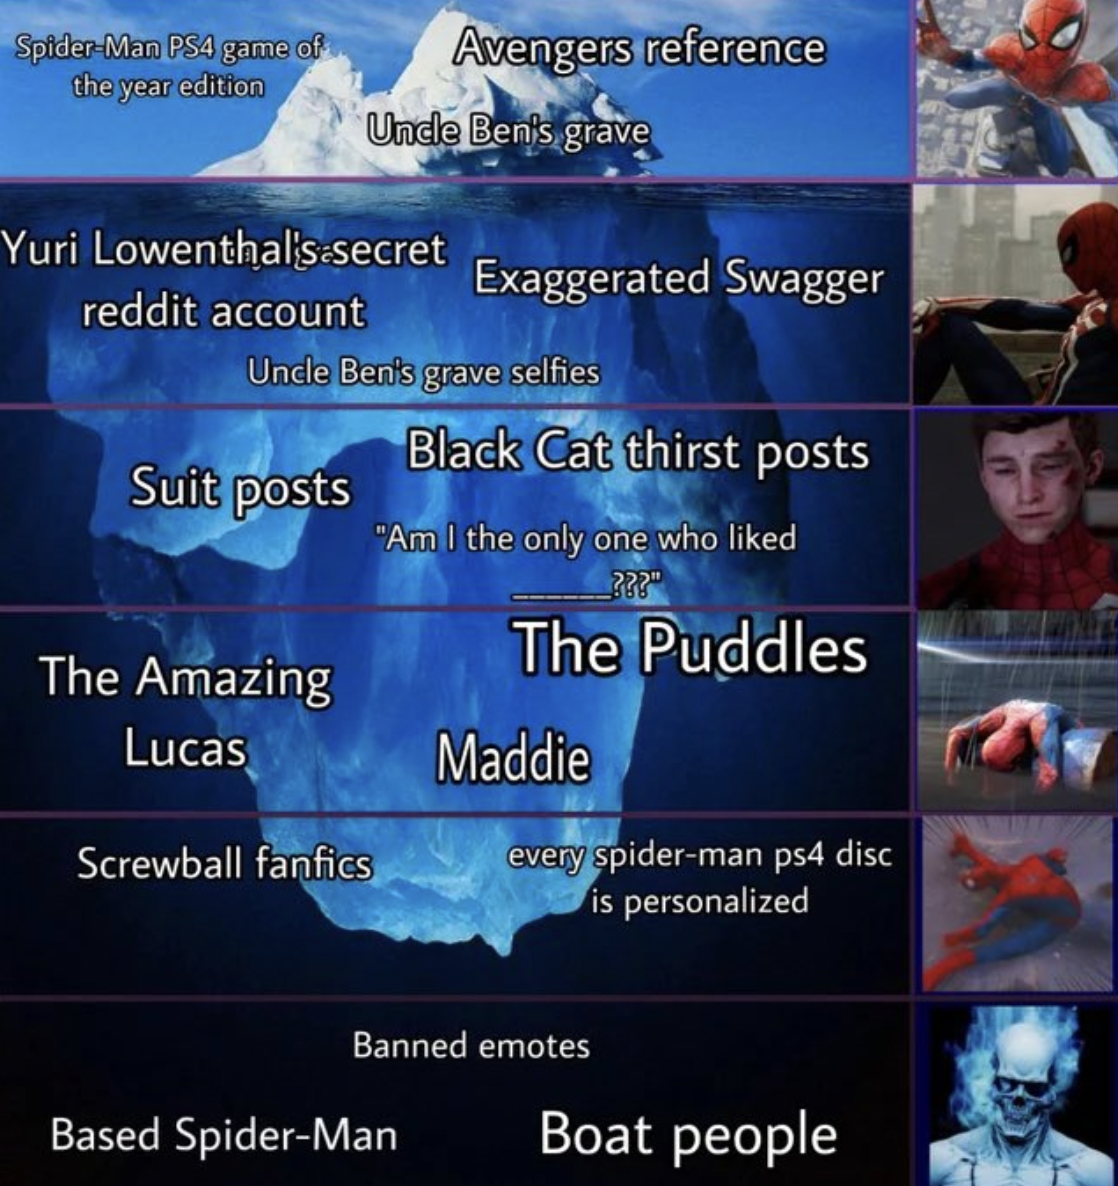 Spider-Man PS4 Memes - scp iceberg - Spider Man PS4 game the year edition of Yuri Lowenthal's secret reddit account Suit posts Unde Ben's grave The Amazing Lucas Avengers reference Uncle Ben's grave selfies Screwball fanfics Exaggerated Swagger